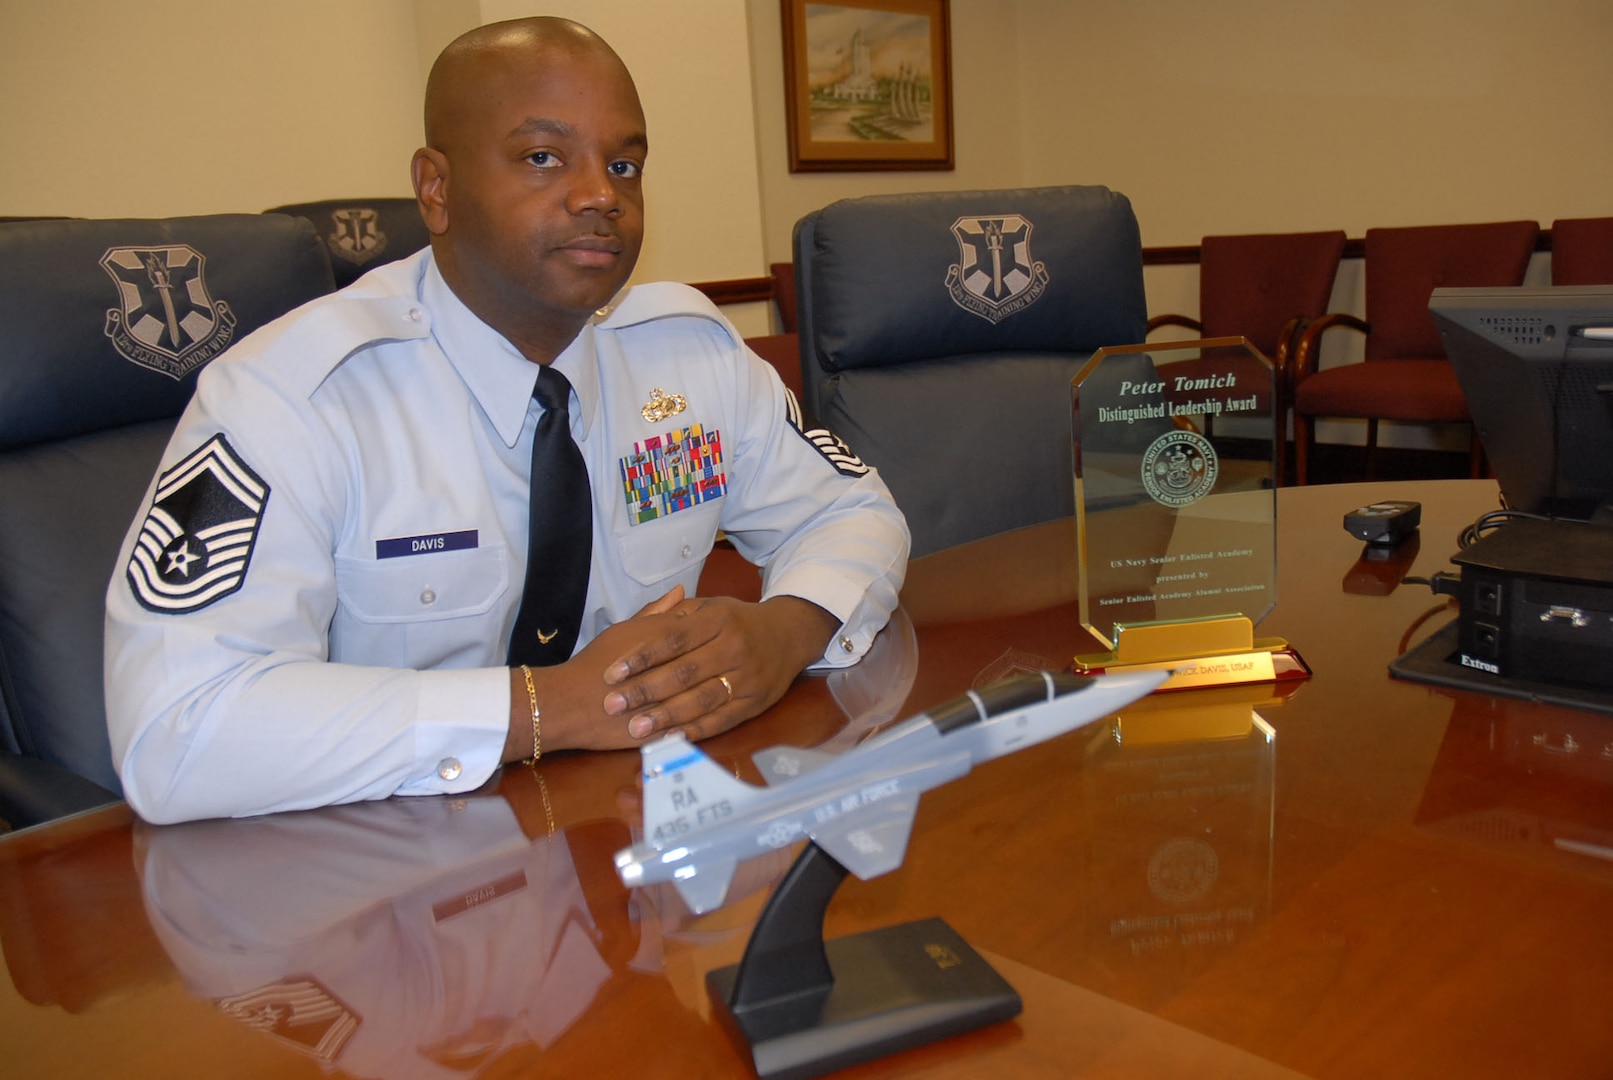 Senior Master Sgt. Renwick Davis recently completed a six-week U.S. Navy Senior Enlisted Academy in Rhode Island. One of just a handful of Air Force participants, Sergeant Davis was voted by his peers as best-in-class and received the coveted Peter Tomich Leadership Award. (U.S. Air Force photo by Thomas Warner)